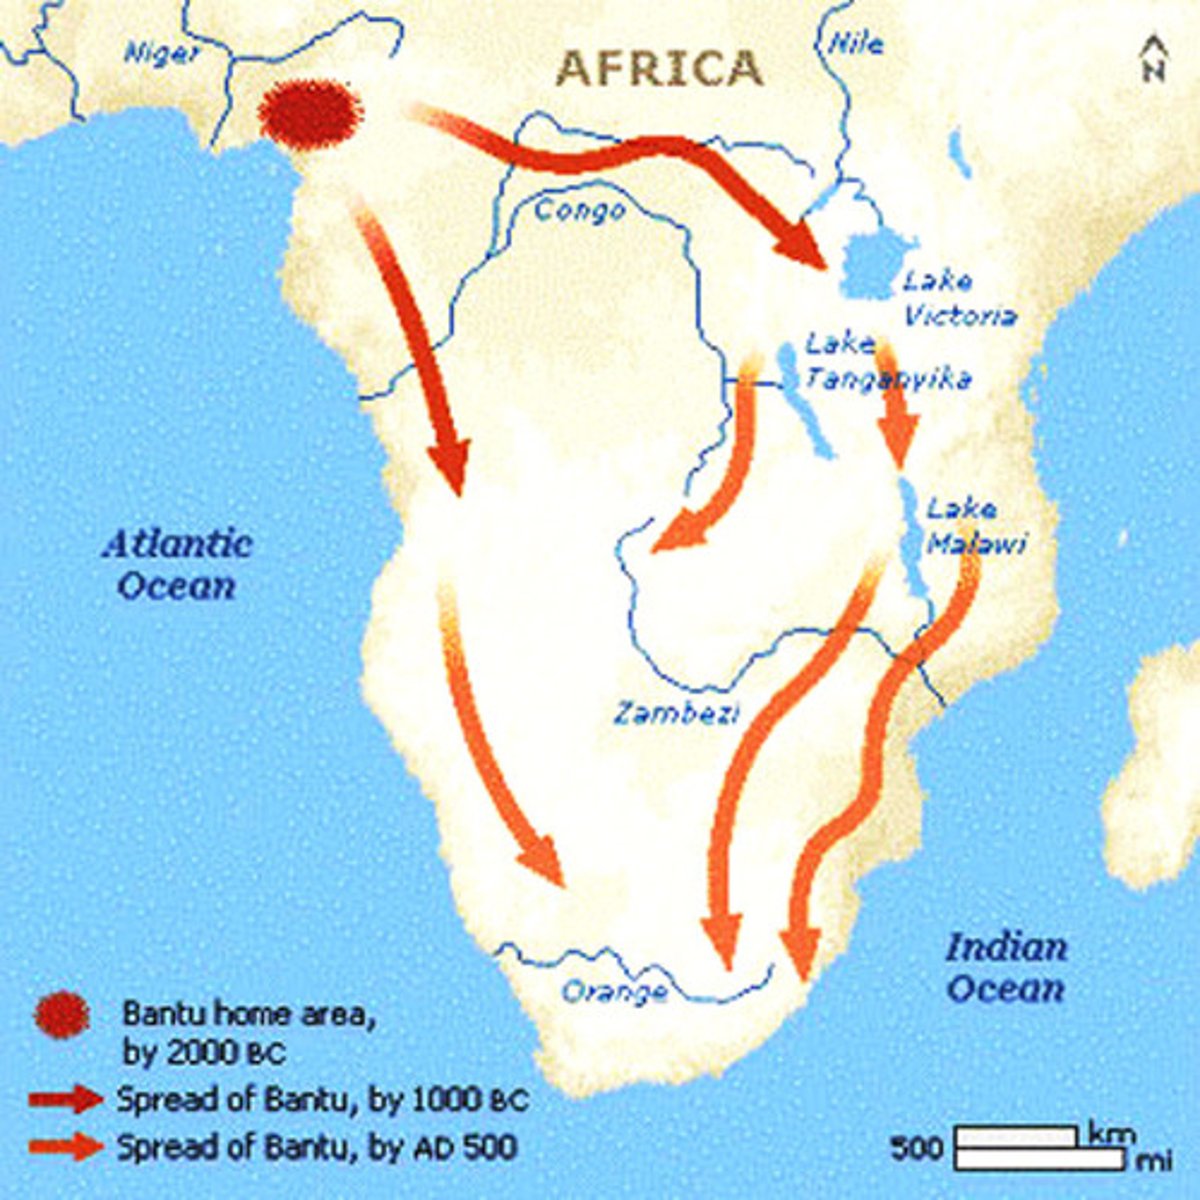 <p>(1500BCE to 500CE) As the Bantu people migrated, they spread the Bantu family of languages and culture. The Bantu also spread the use of iron, which improved farming techniques and agricultural efficiency, the greater food supply sparked economic development and population growth. The changes instigated by the Bantu migration increased the vitality of sub-Saharan Africa.</p>